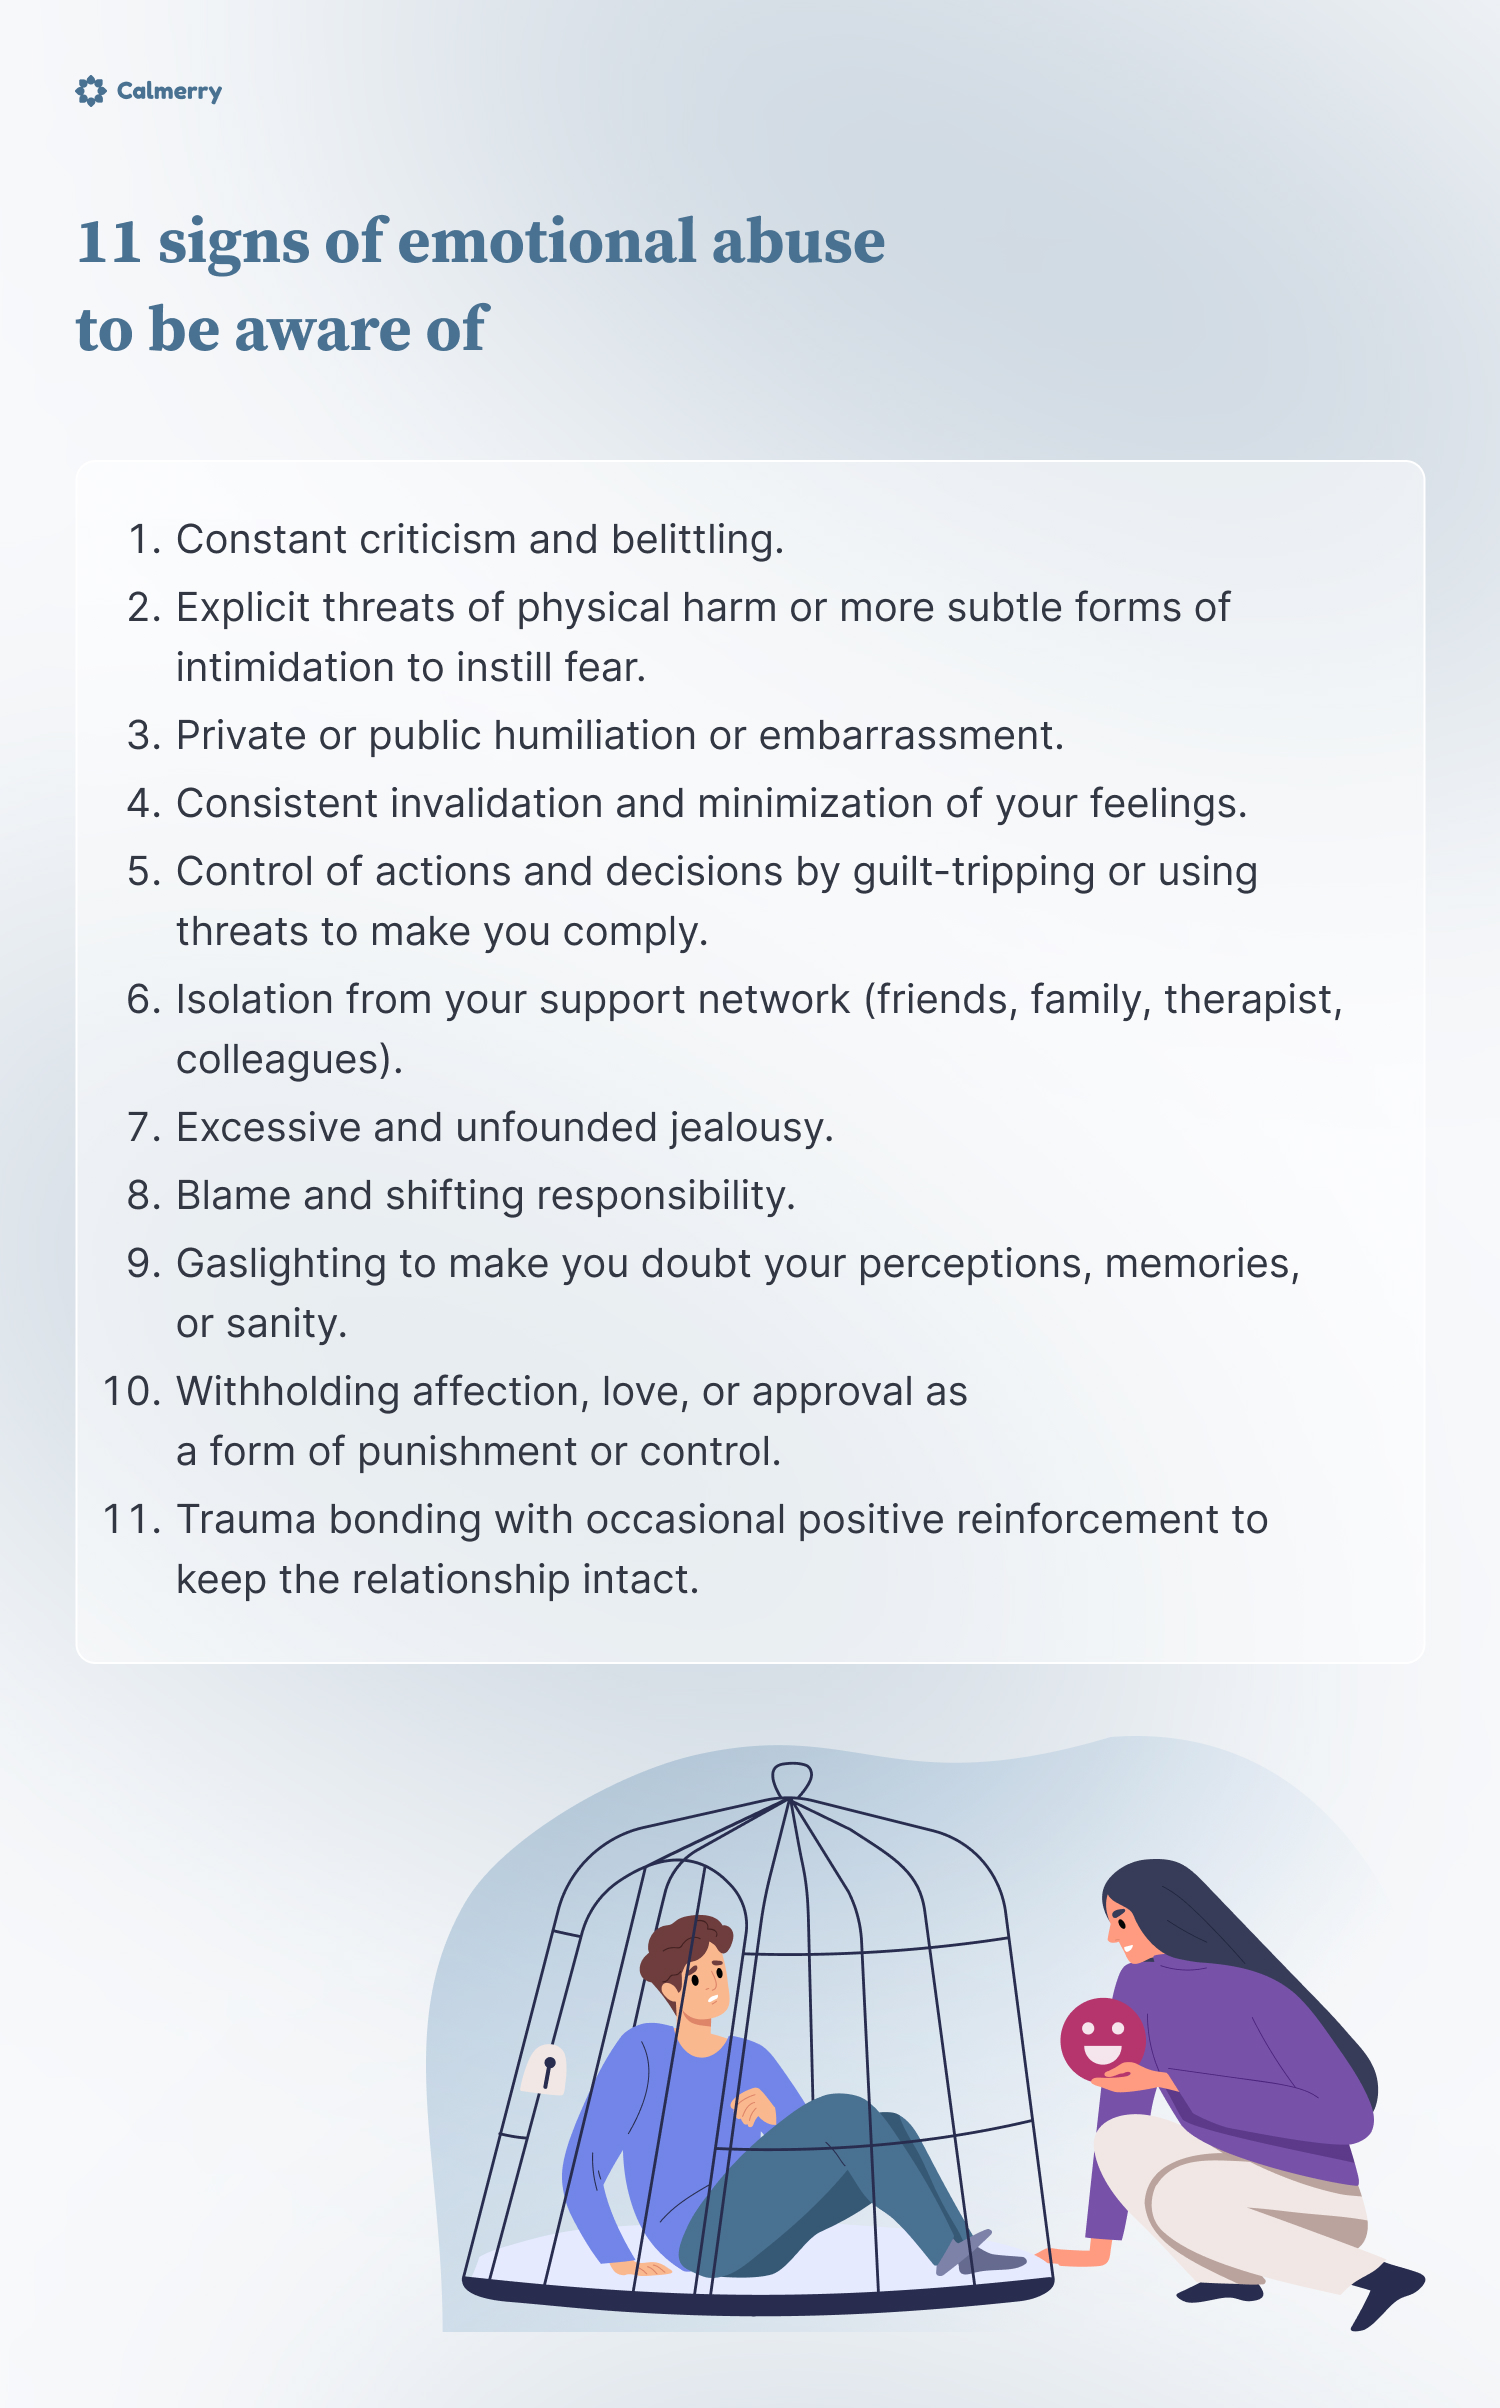 11 signs of emotional abuse to be aware of 
Constant criticism and belittling. 
Explicit threats of physical harm or more subtle forms of intimidation to instill fear.
Private or public humiliation or embarrassment.
Consistent invalidation and minimization of your feelings.
Control of actions and decisions by guilt-tripping or using threats to make you comply.
Isolation from your support network (friends, family, therapist, colleagues).
Excessive and unfounded jealousy. 
Blame and shifting responsibility.
Gaslighting to make you doubt your perceptions, memories, or sanity.
Withholding affection, love, or approval as a form of punishment or control. 
Trauma bonding with occasional positive reinforcement to keep the relationship intact.
